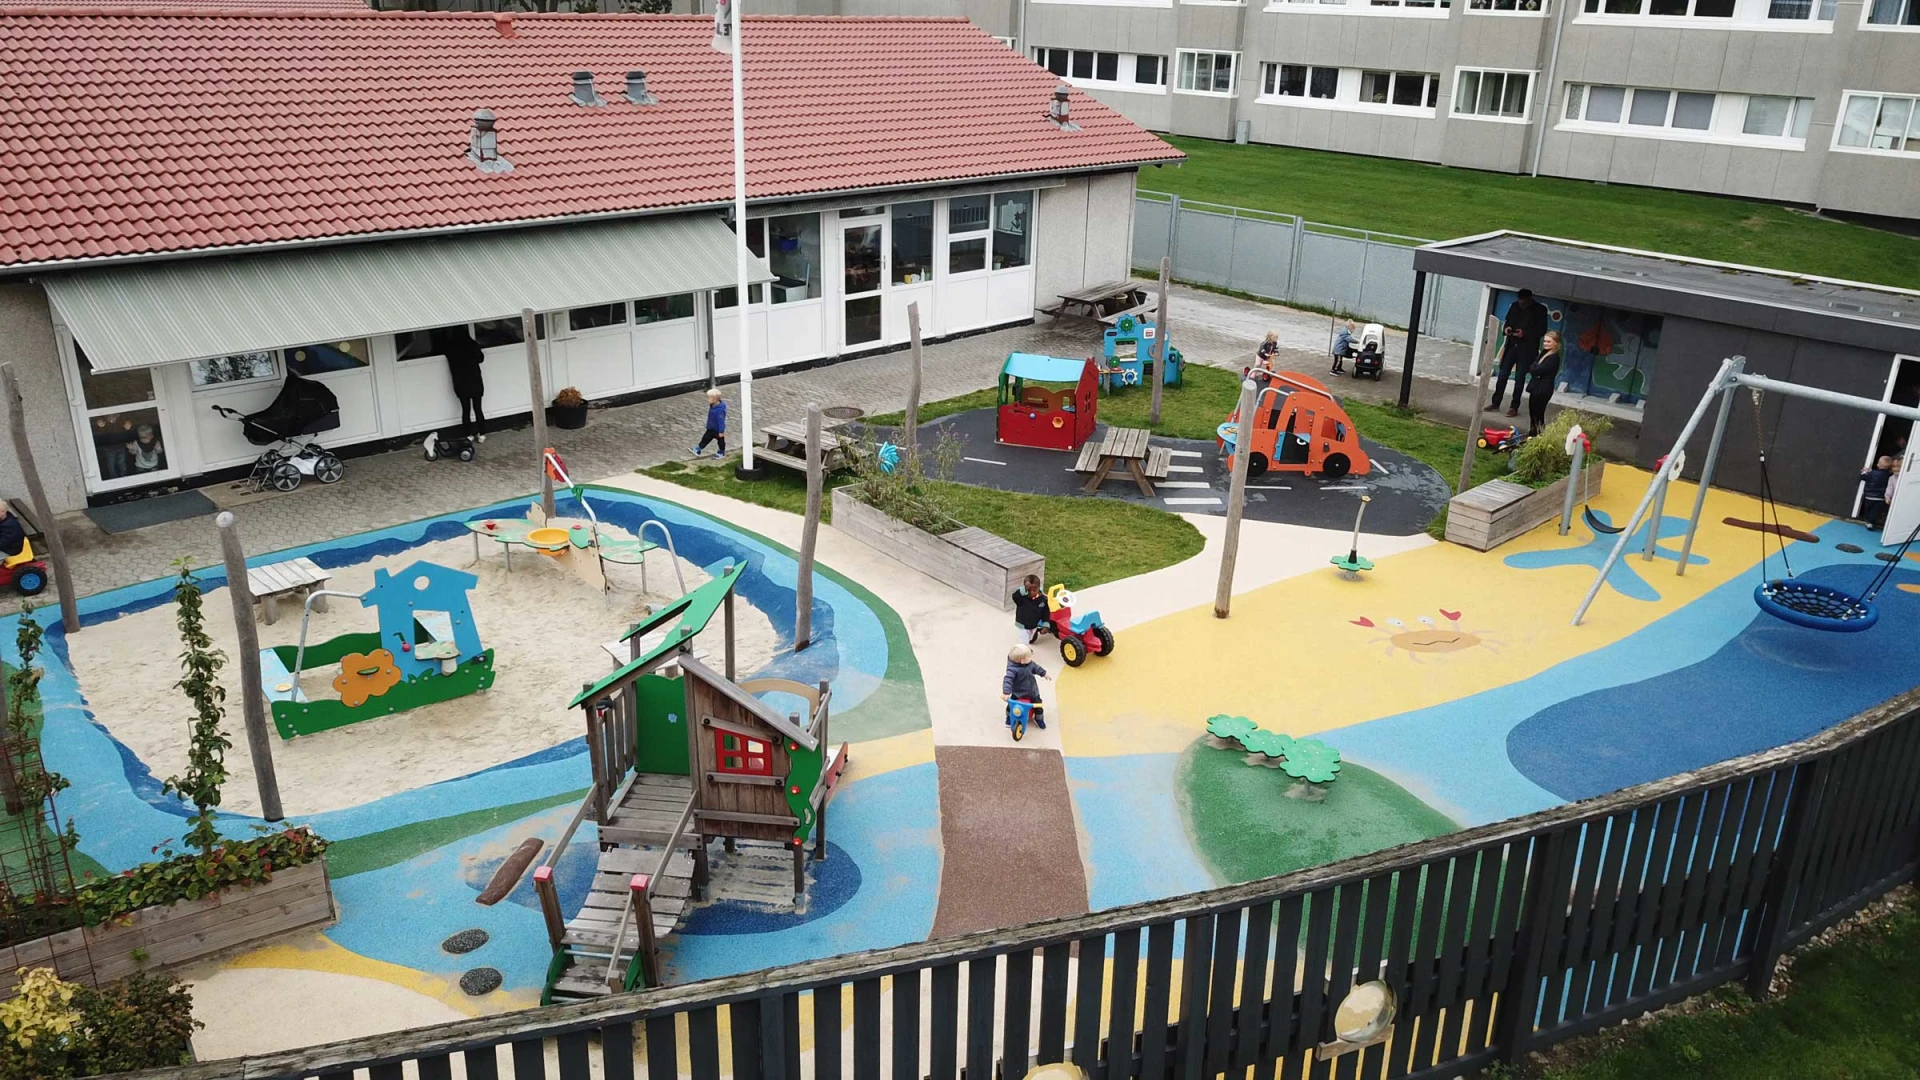 Drone photo of a colourful preschool playground with swings, wooden equipment, a sandpit and more. Offering different types of play is a great way to improve the popularity of your outdoor playground project.